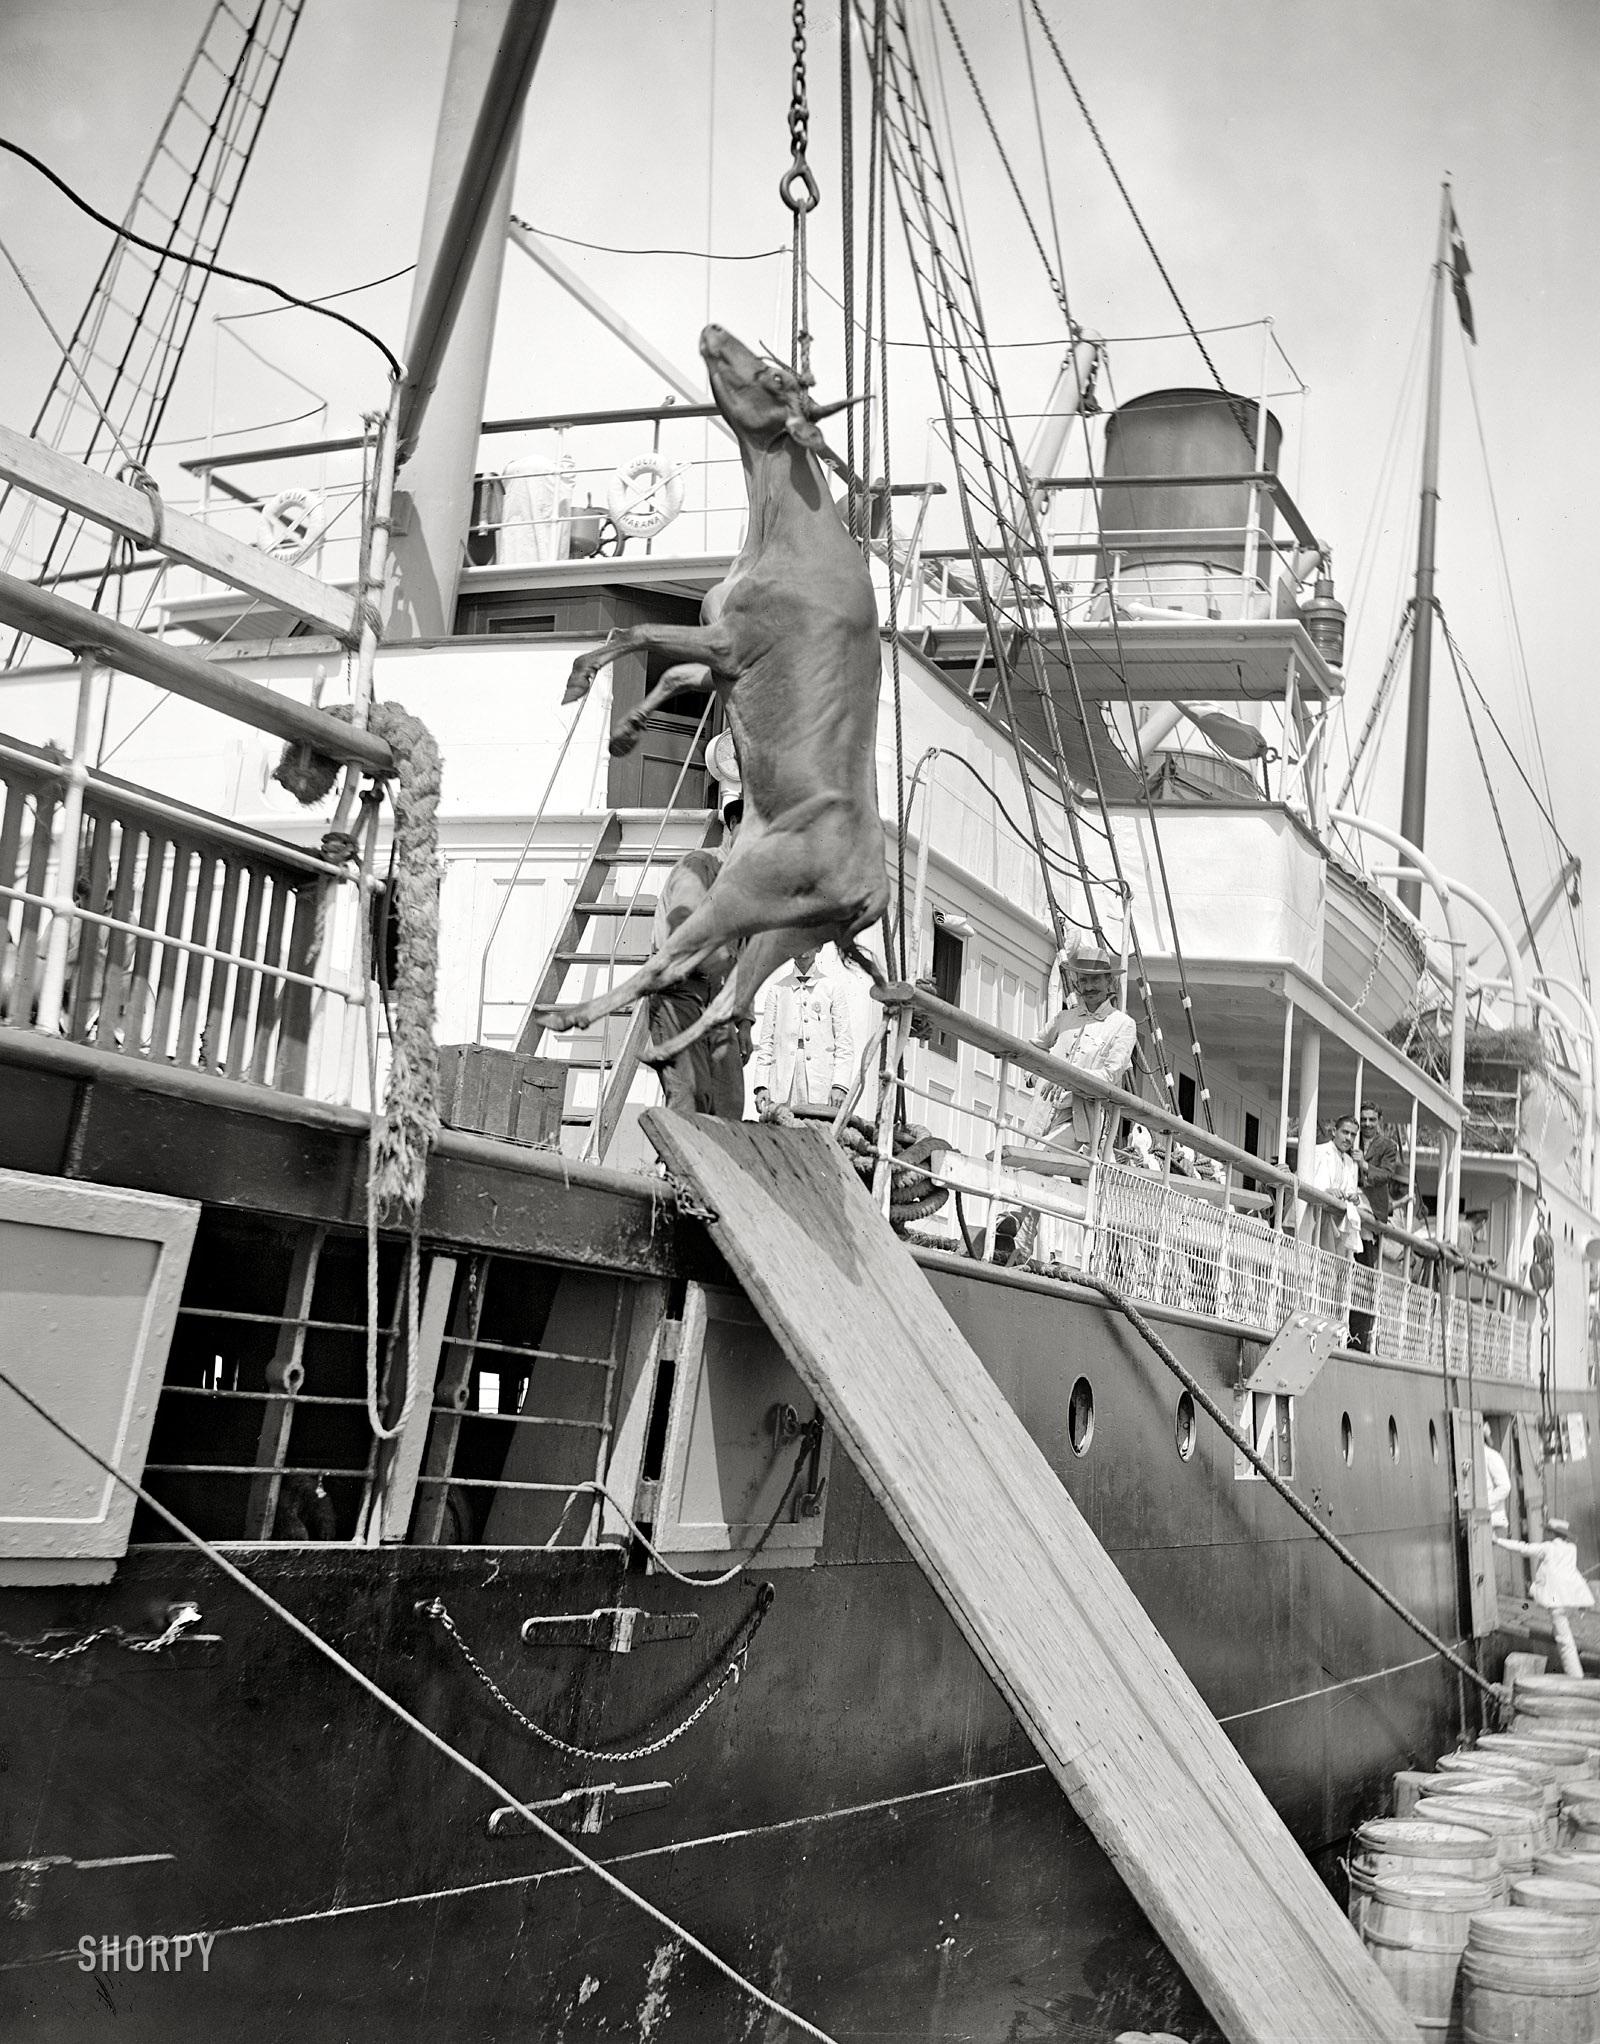 "Unloading cattle from ocean steamer Julia." Traveling steerage circa 1906. 8x10 inch dry plate glass negative, Detroit Publishing Company. View full size.